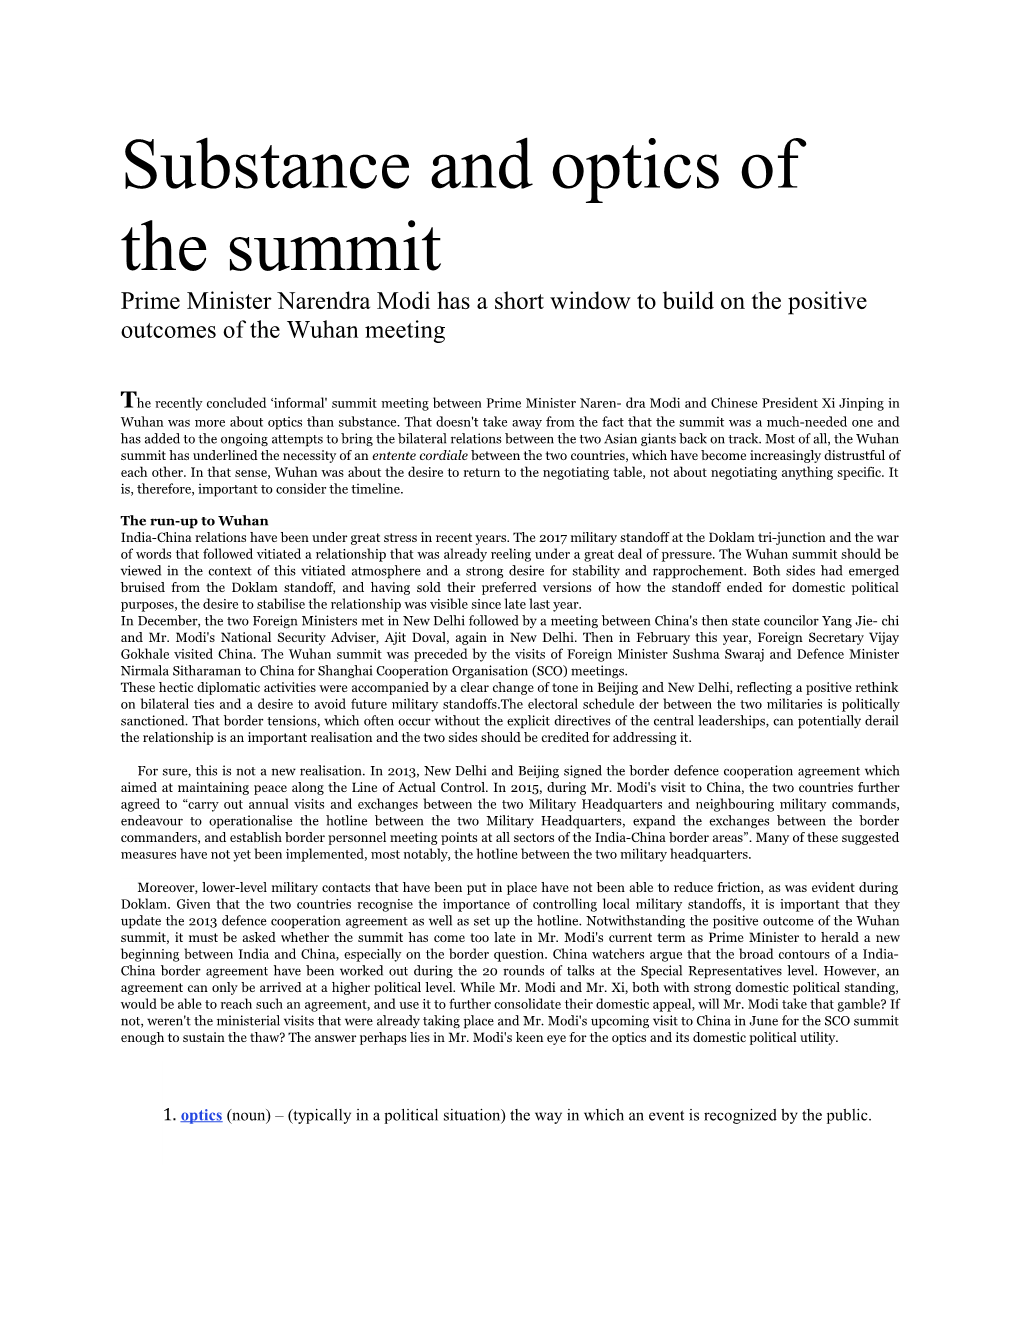 Substance and Optics of the Summit